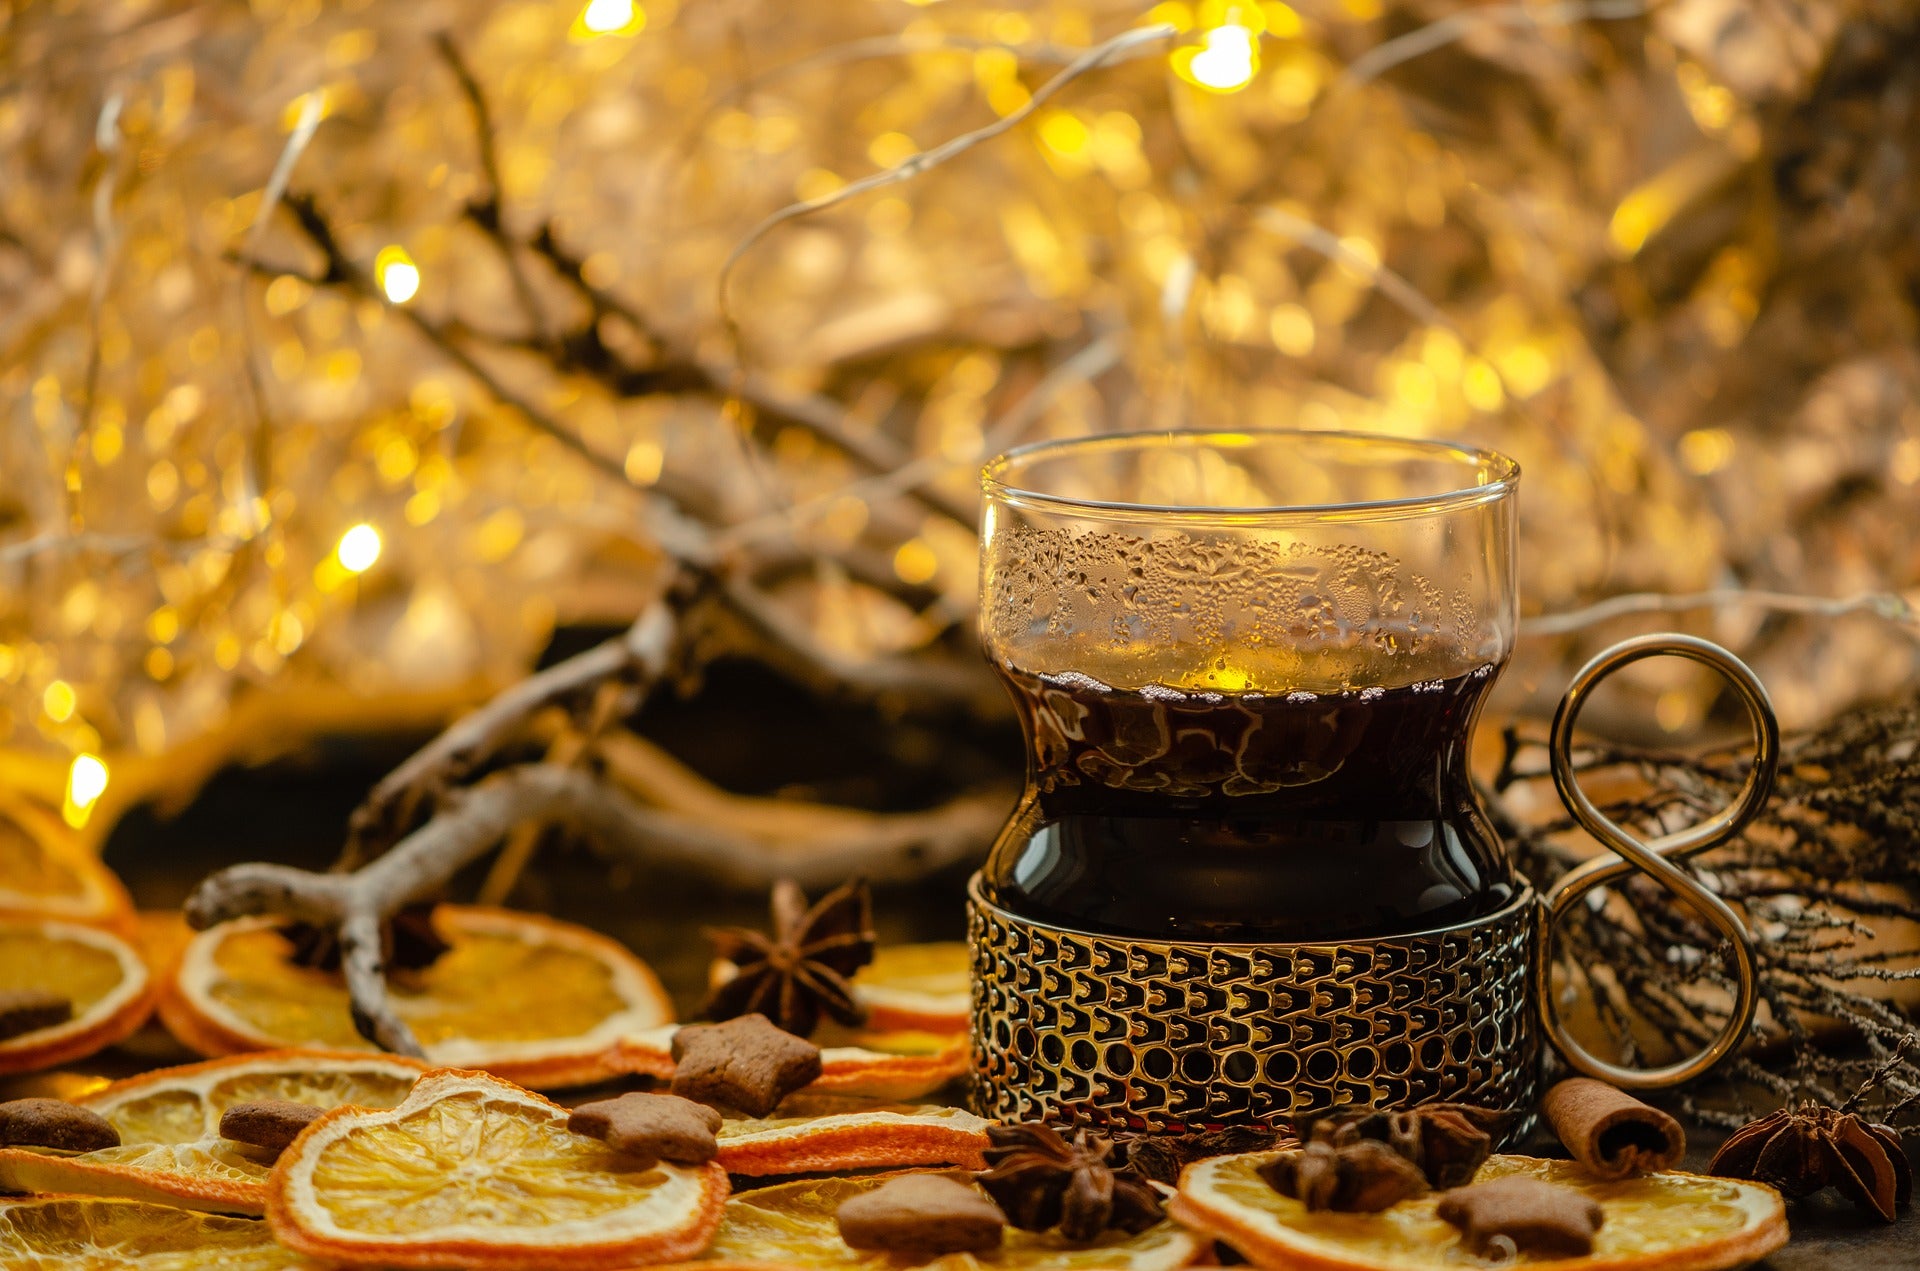 A Step By Step Guide to Making Mulled Wine